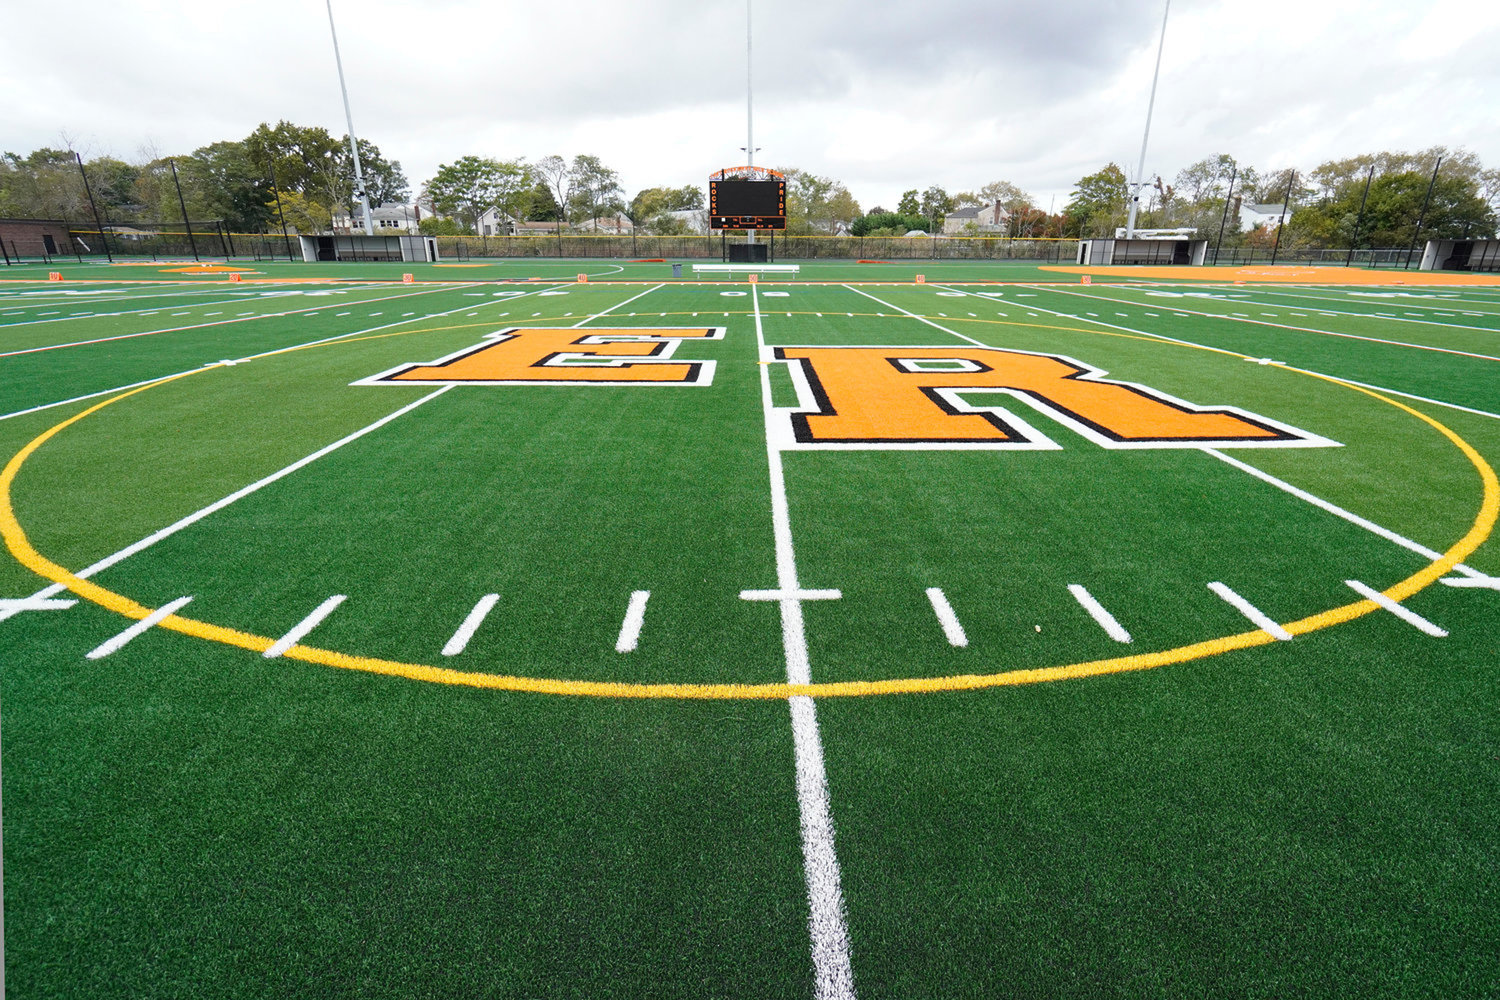 Part of the $27.7 million bond that East Rockaway voters approved in November 2019 funded the new athletic field, which hosted a “soft” opening last month.